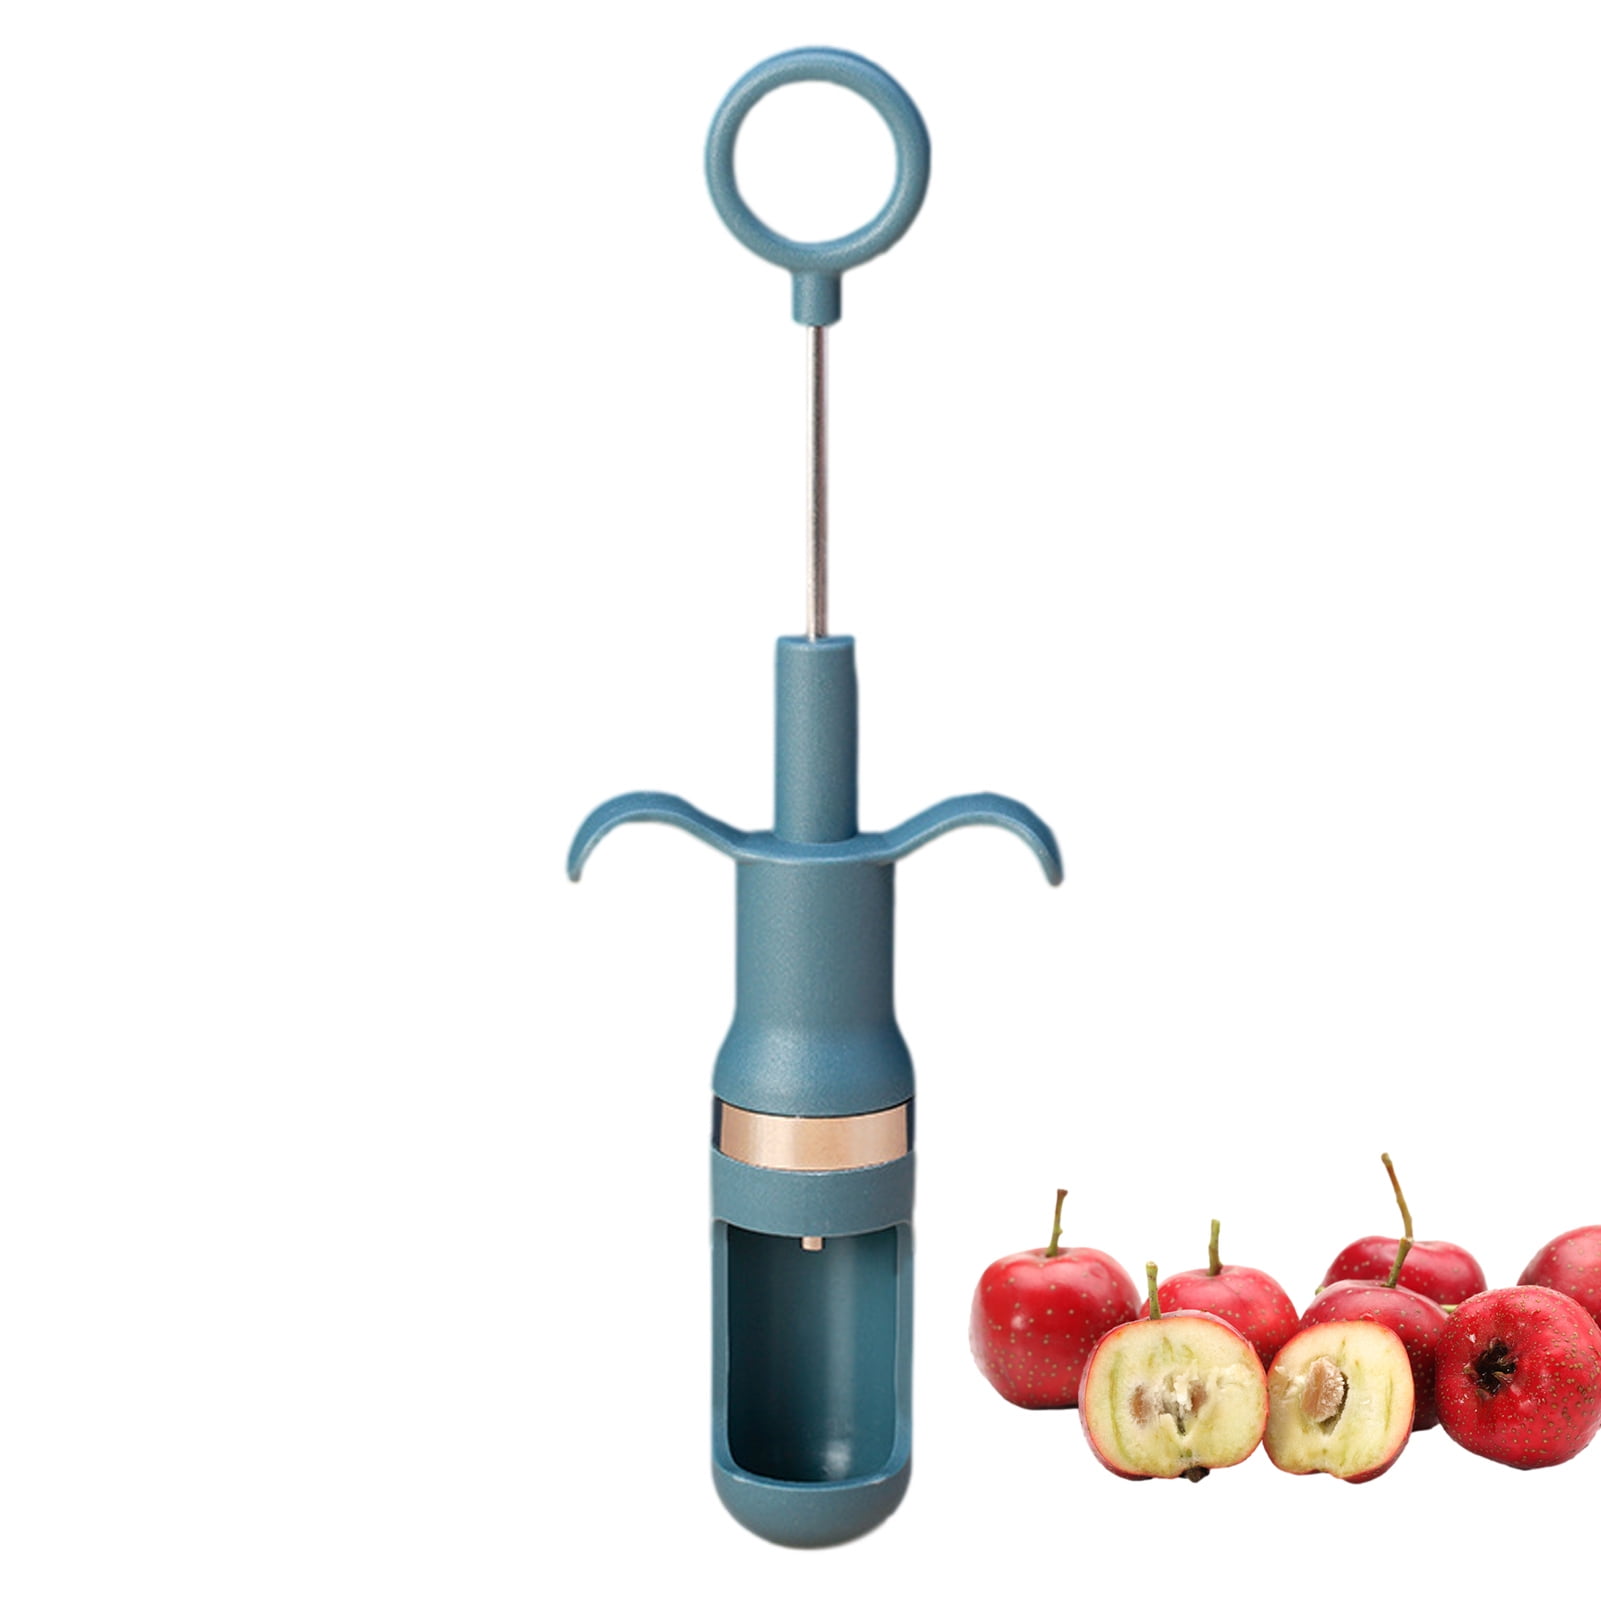 Dropship 1pc; Cherry Corer; Cherry Pitter; Fruit Corer; Vegetable Corer;  Multifunctional Fruit Core Digger; Creative Vegetable Hole Digger; Fruit  Core Remover; Kitchen Gadgets to Sell Online at a Lower Price